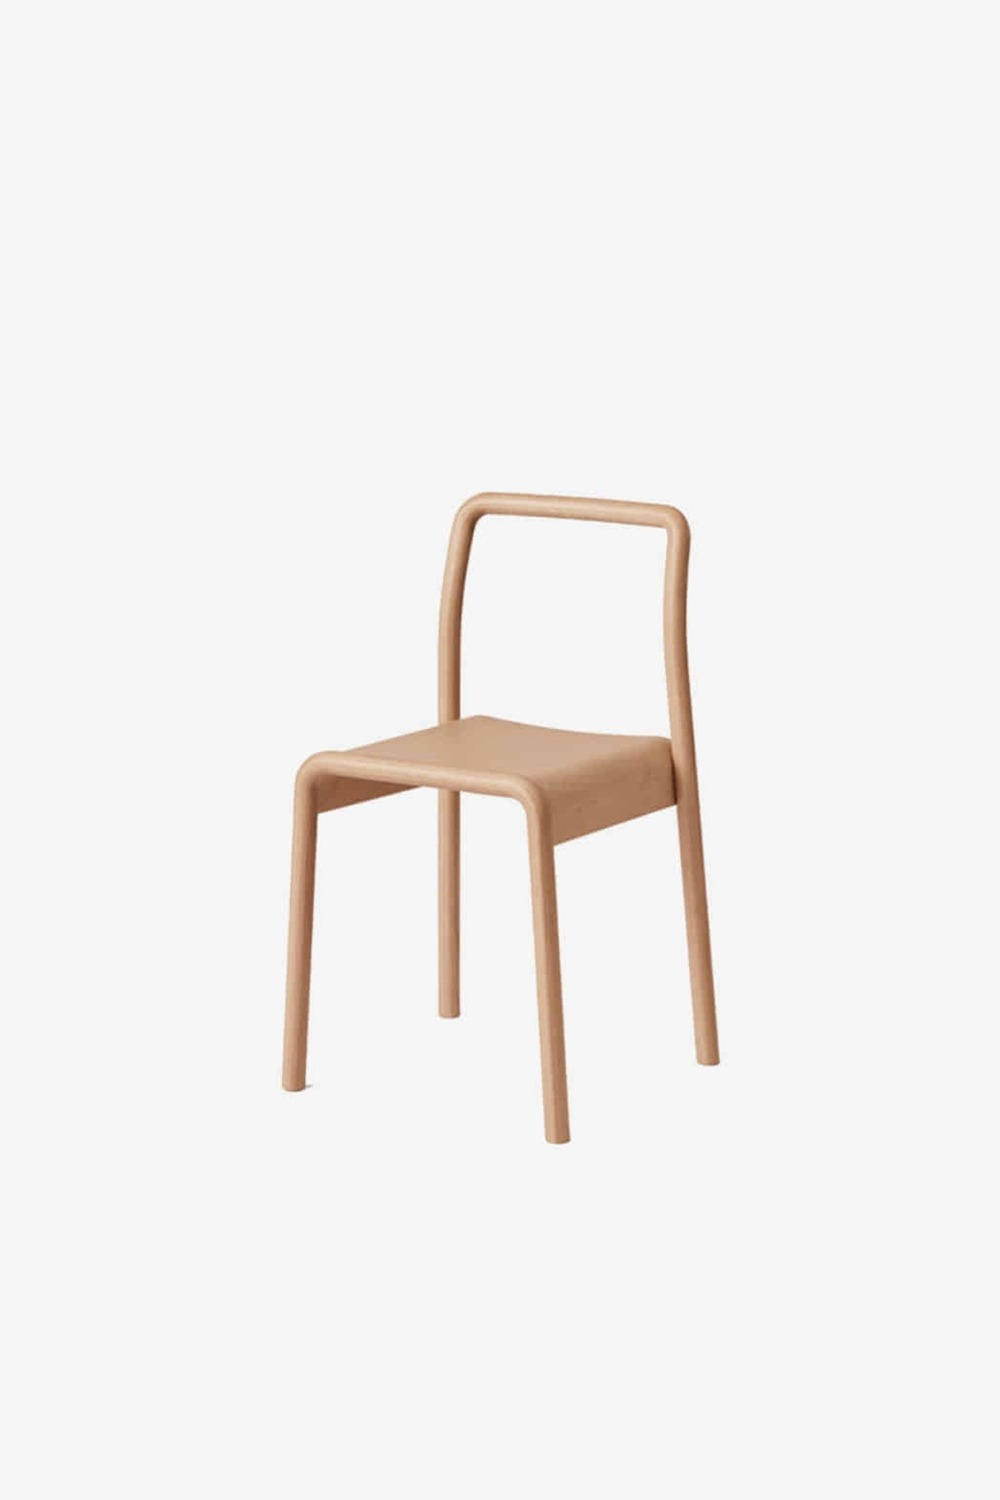 [TAKT] Tool Chair (Natural)